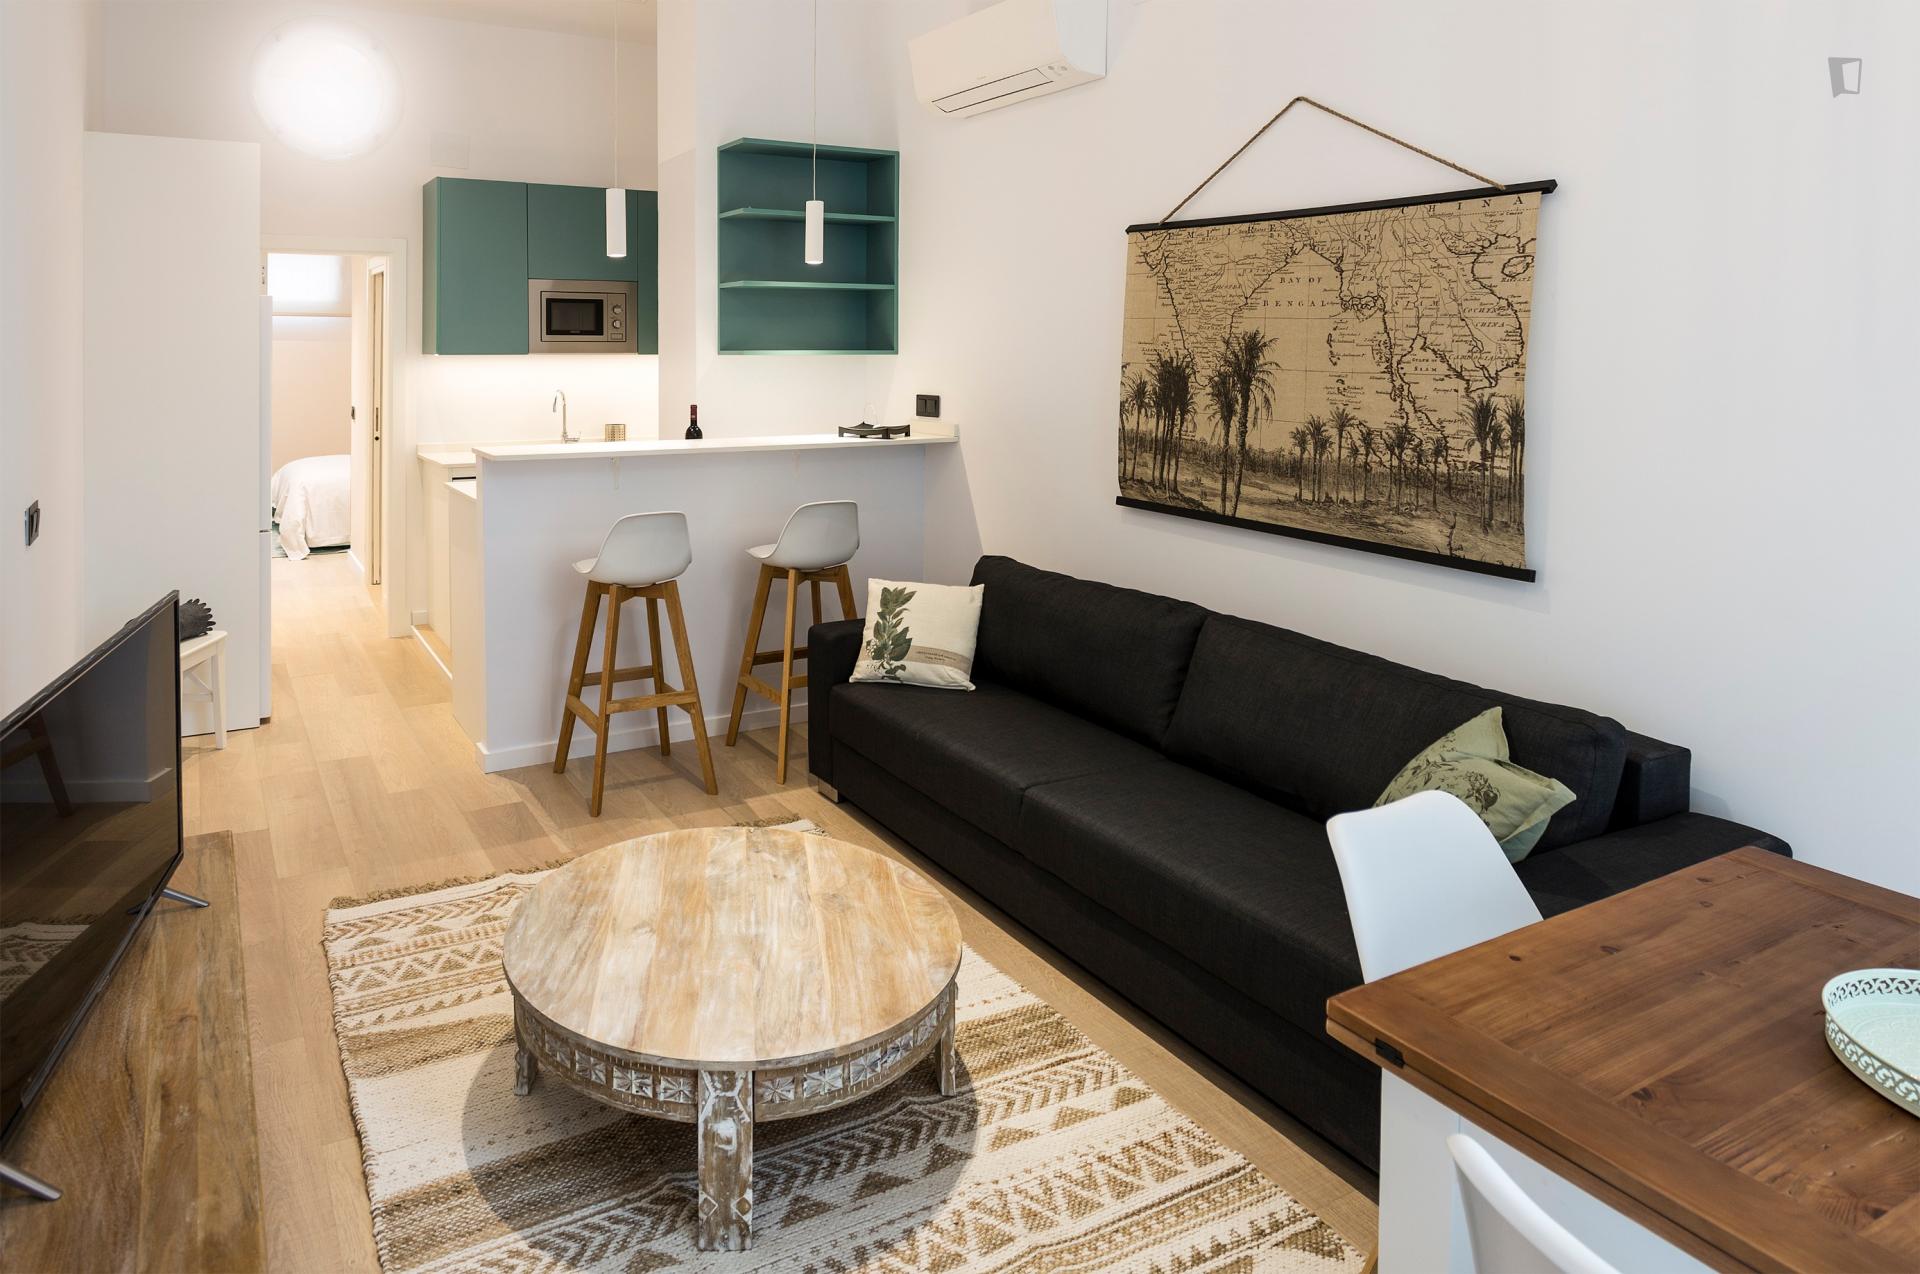 Cos - One bedroom home in Madrid